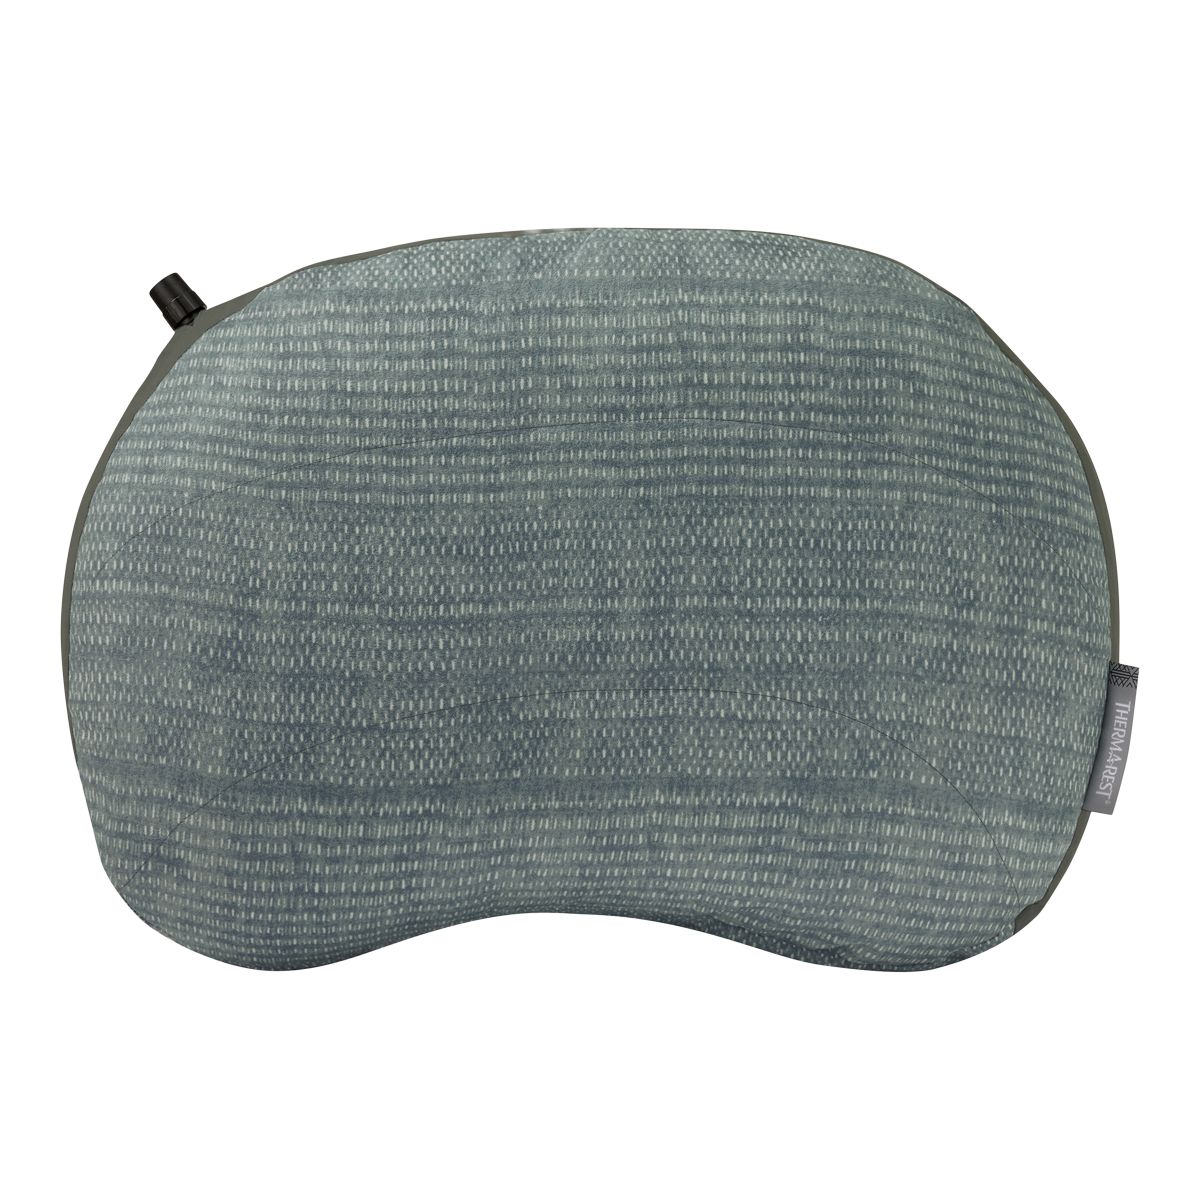 Image of Therm-A-Rest Air Head Large Pillow